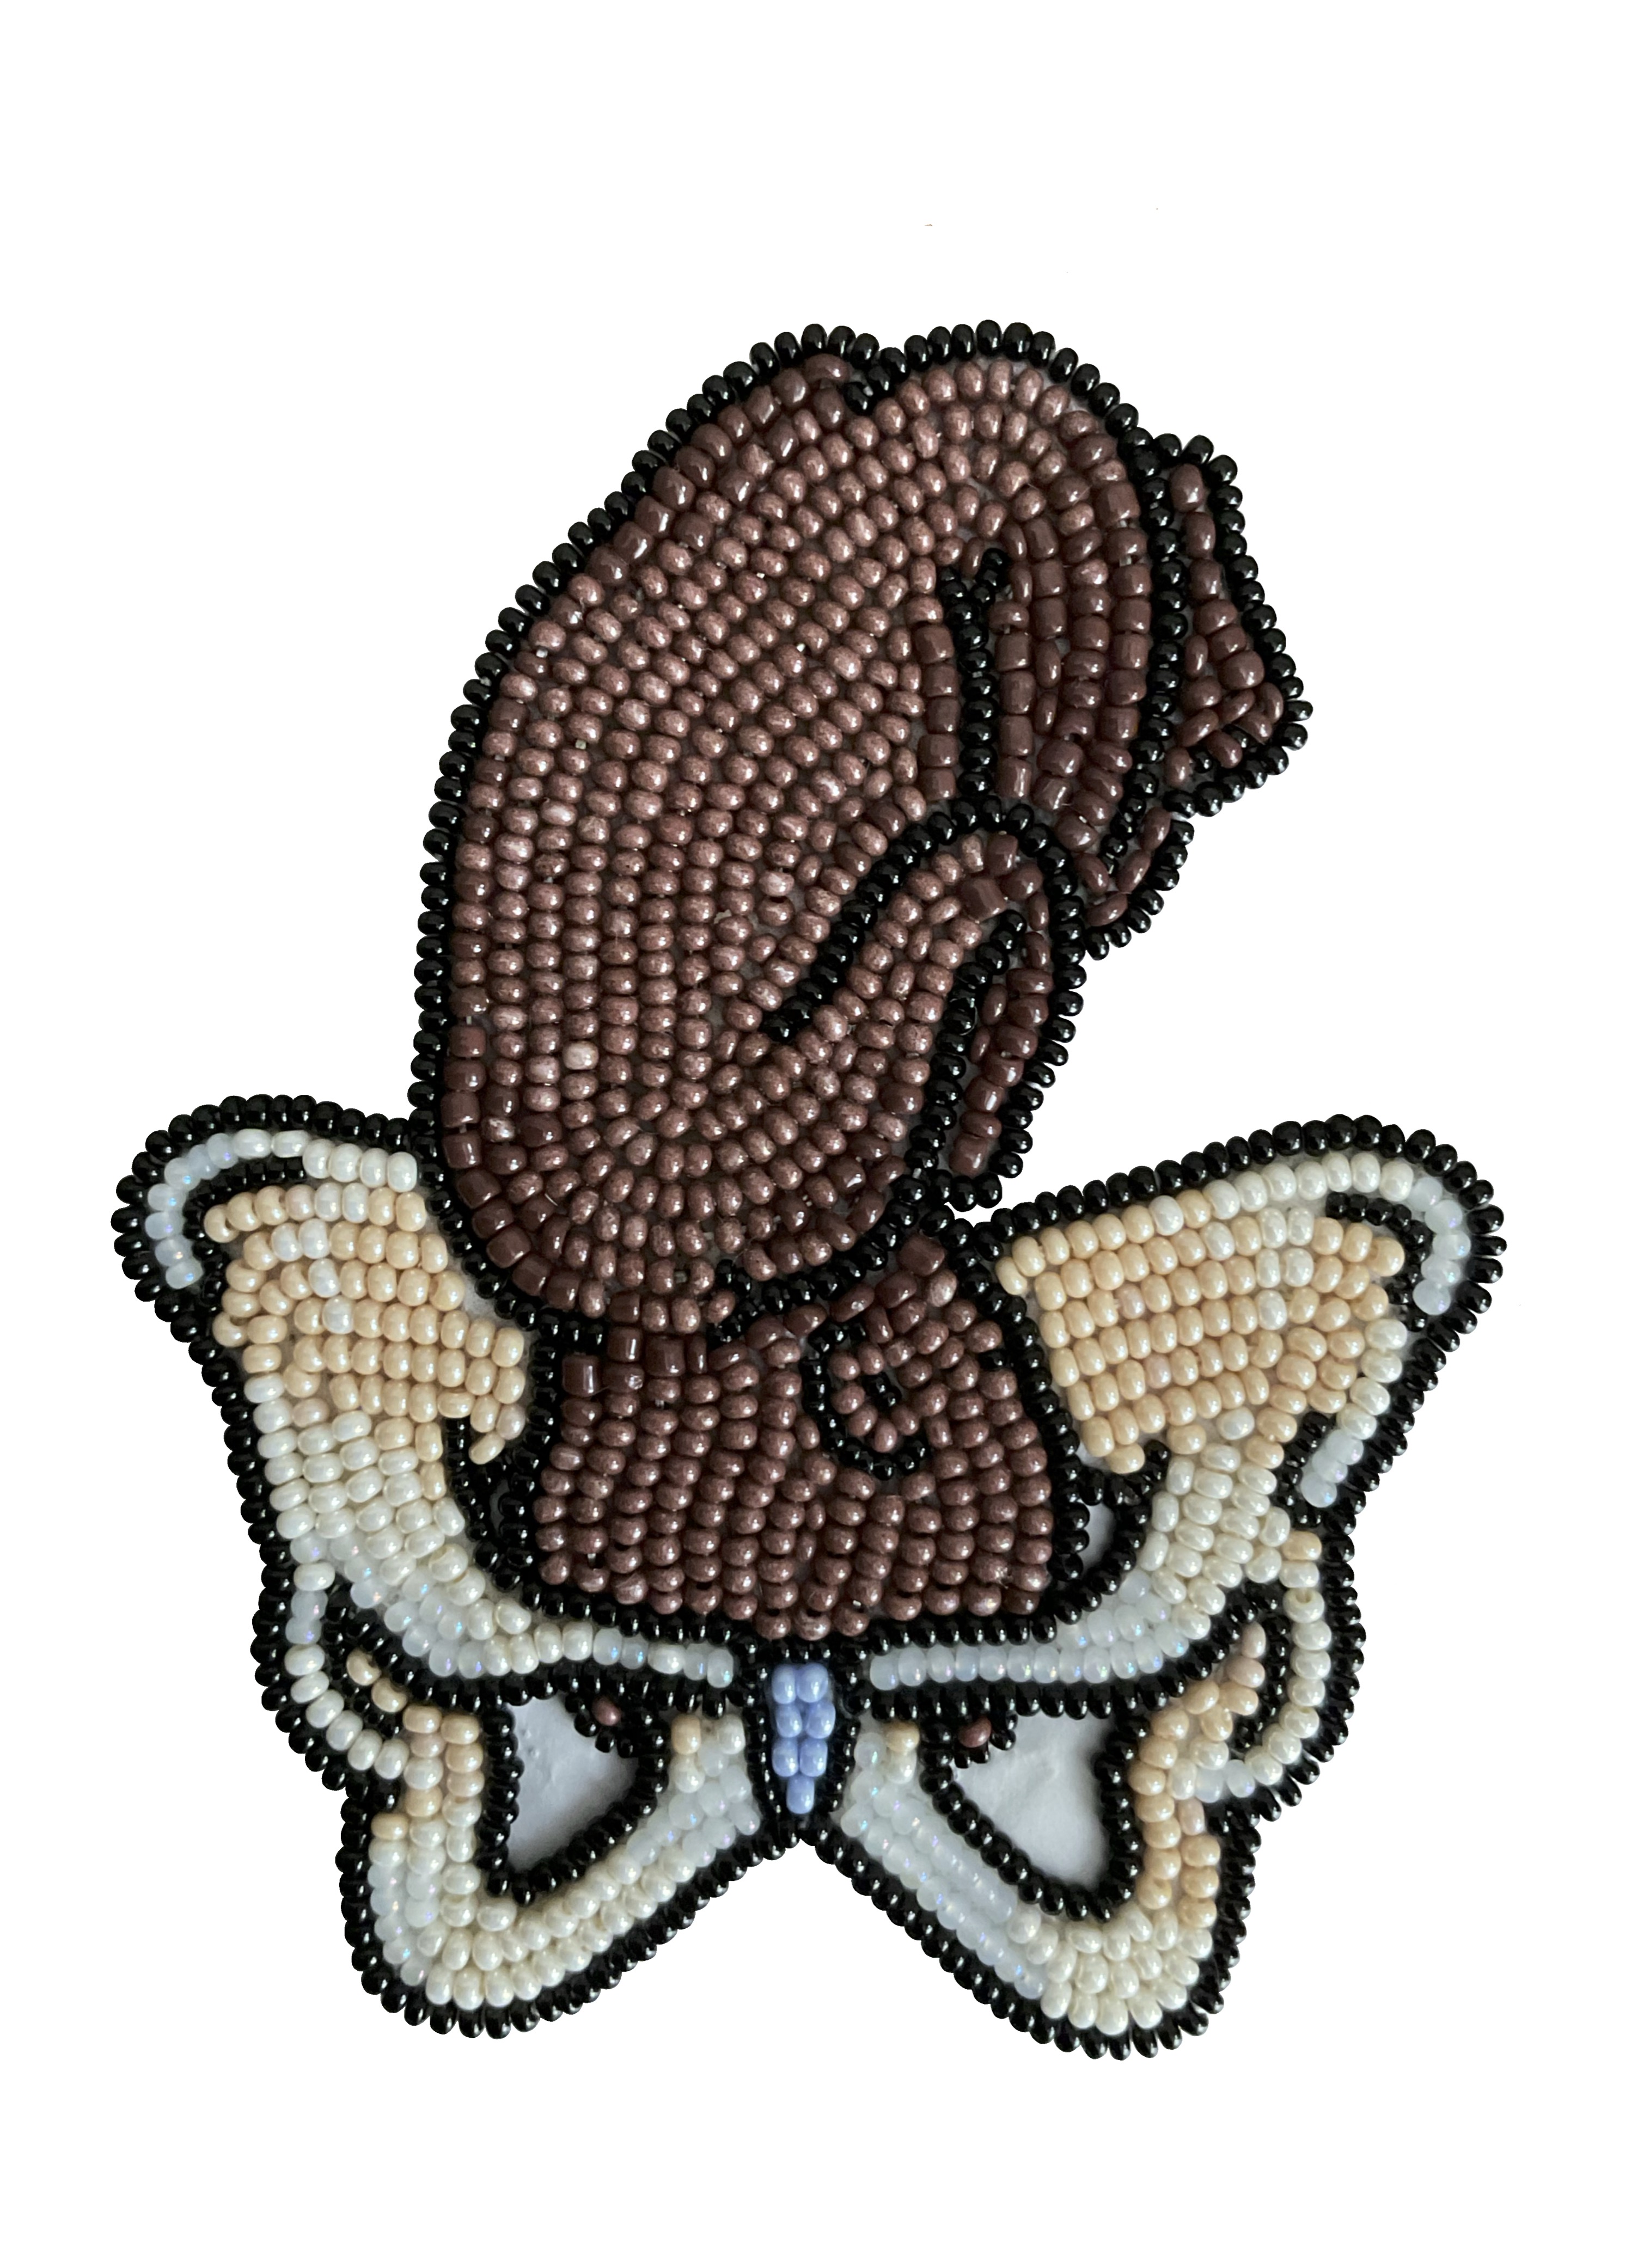 Handmade beadwork depicting a Black fetus with their head within a pelvic bone, about to be born.